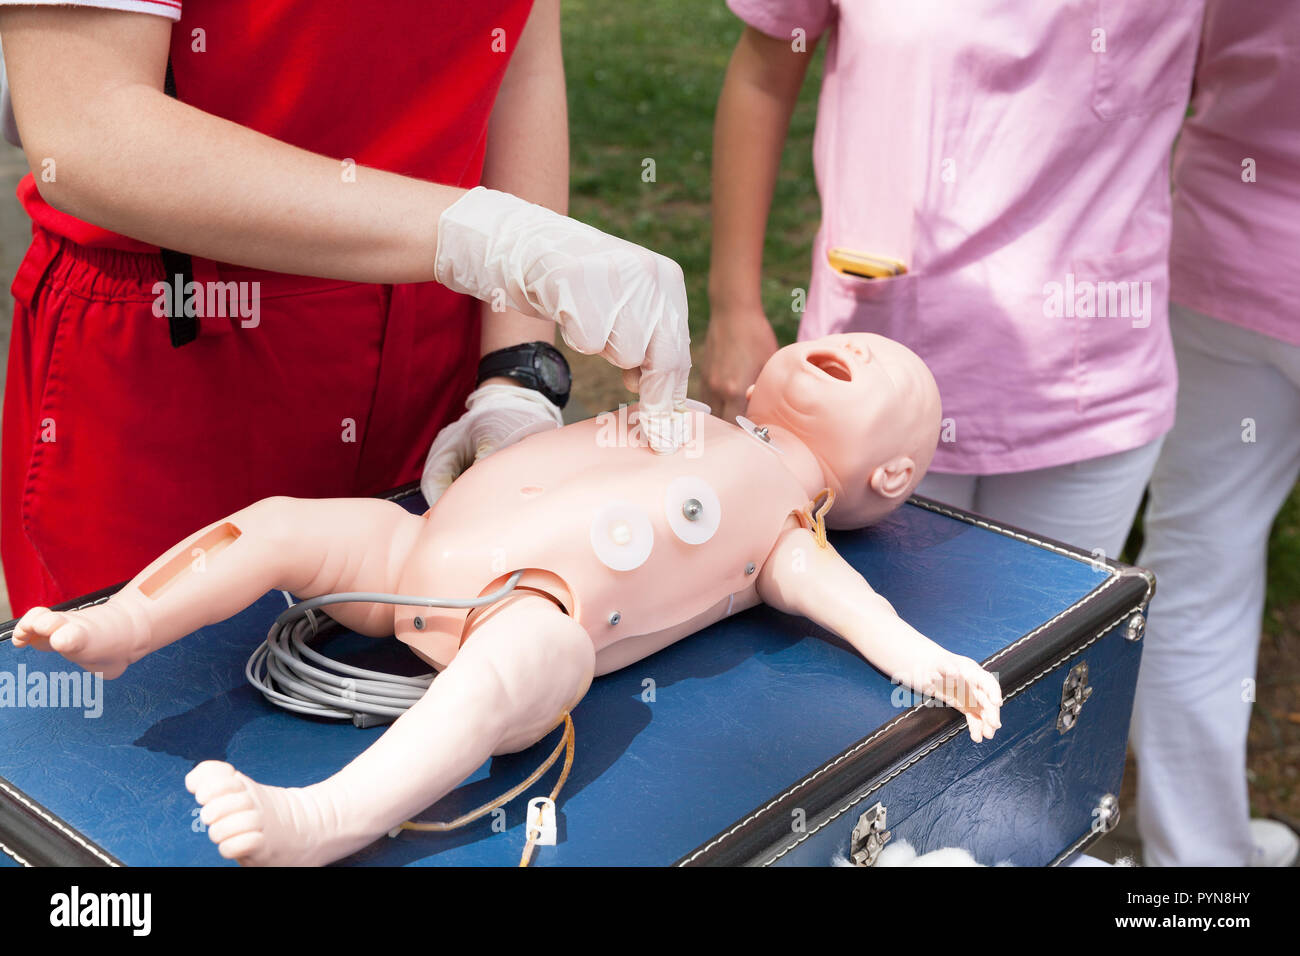 Demonstration of cardiopulmonary resuscitation on a cpr infant dummy during first aid training. Stock Photo